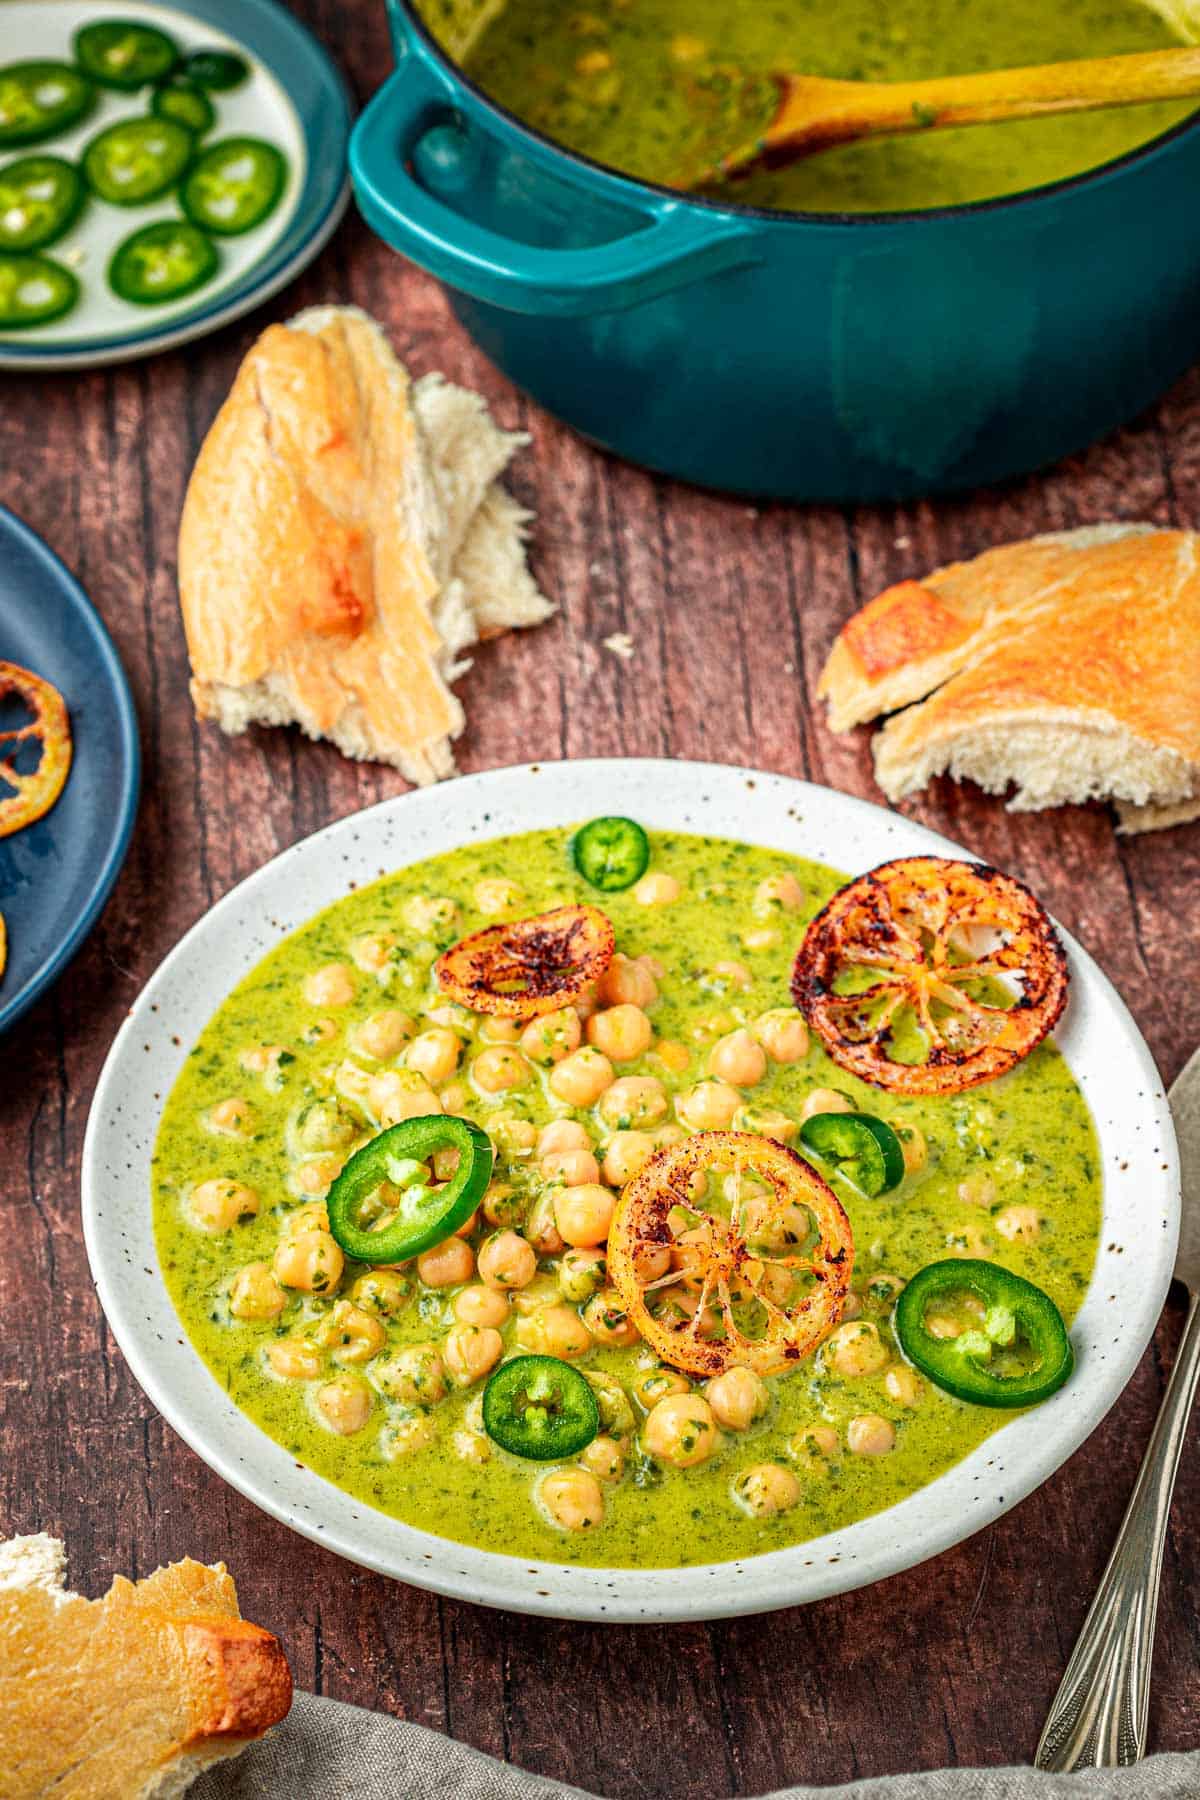 a bowl of creamy pesto braised chickpeas topped with sliced jalapenos and fried lemons next to a spoon, pieces of crusty bread a pot of braised chickpeas and a plate of sliced jalapenos.